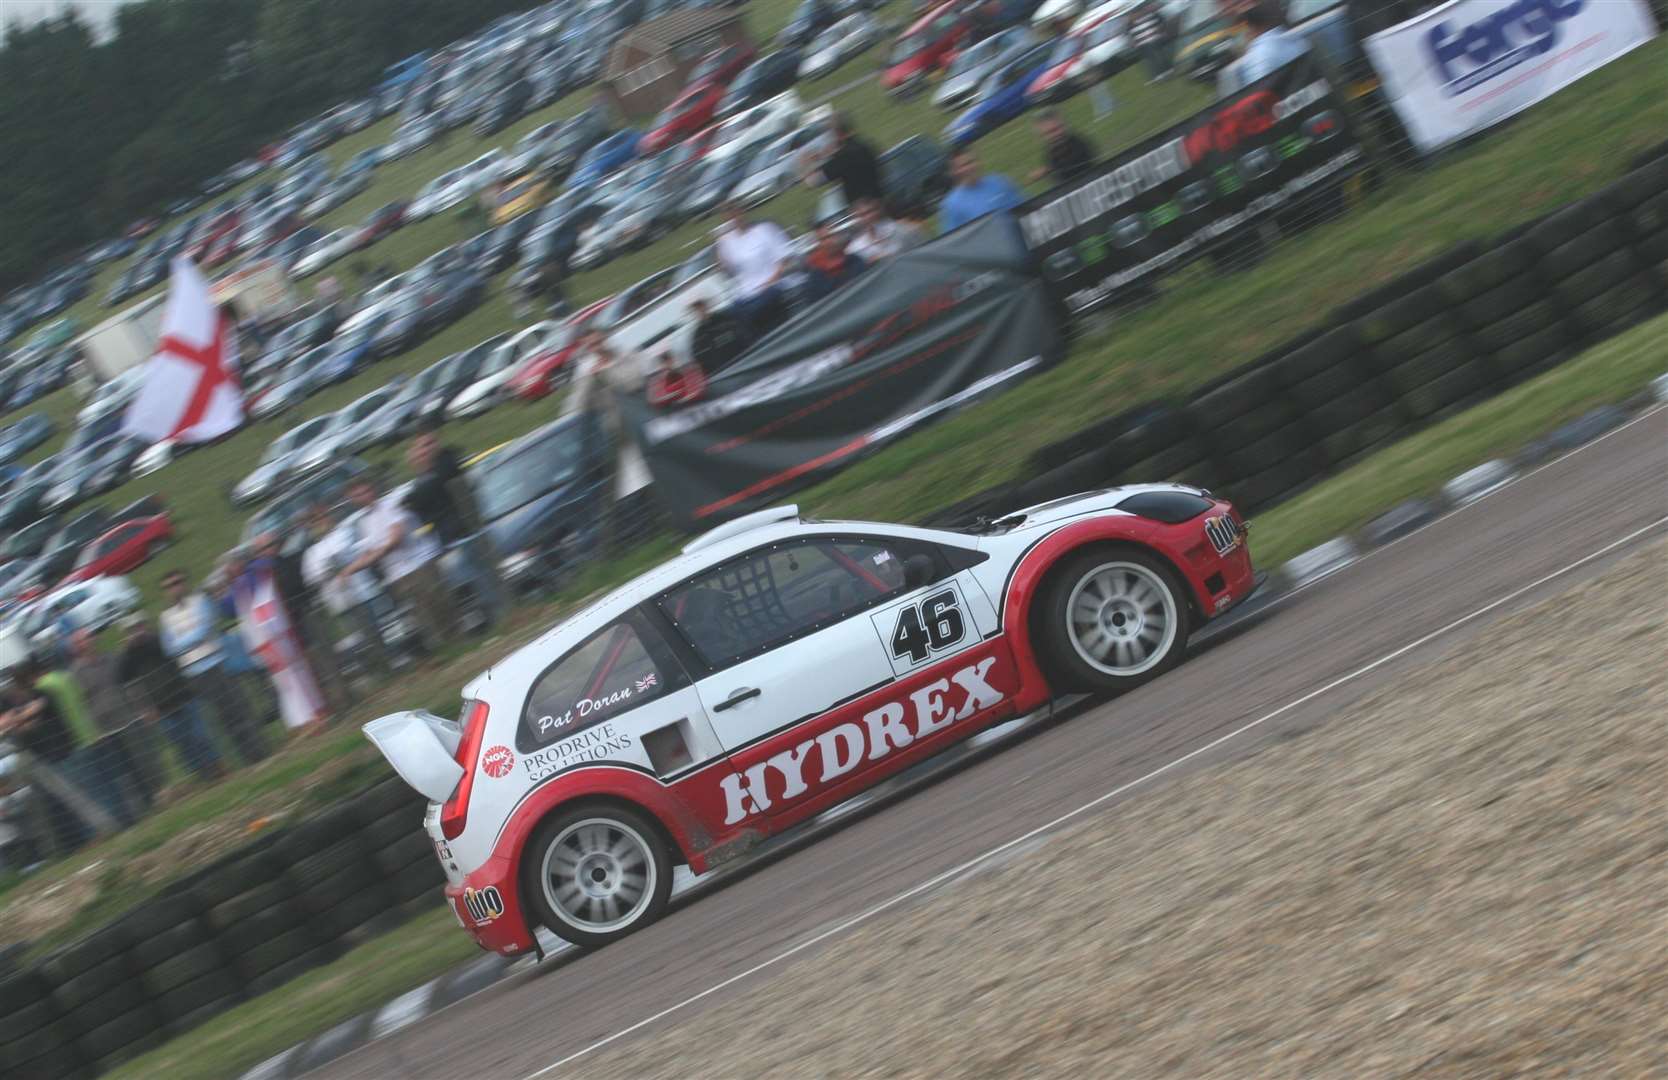 Pat Doran races his Ford Fiesta past part of the enormous crowd at Lydden on August Bank Holiday Monday in 2008. Picture: Kerry Dunlop